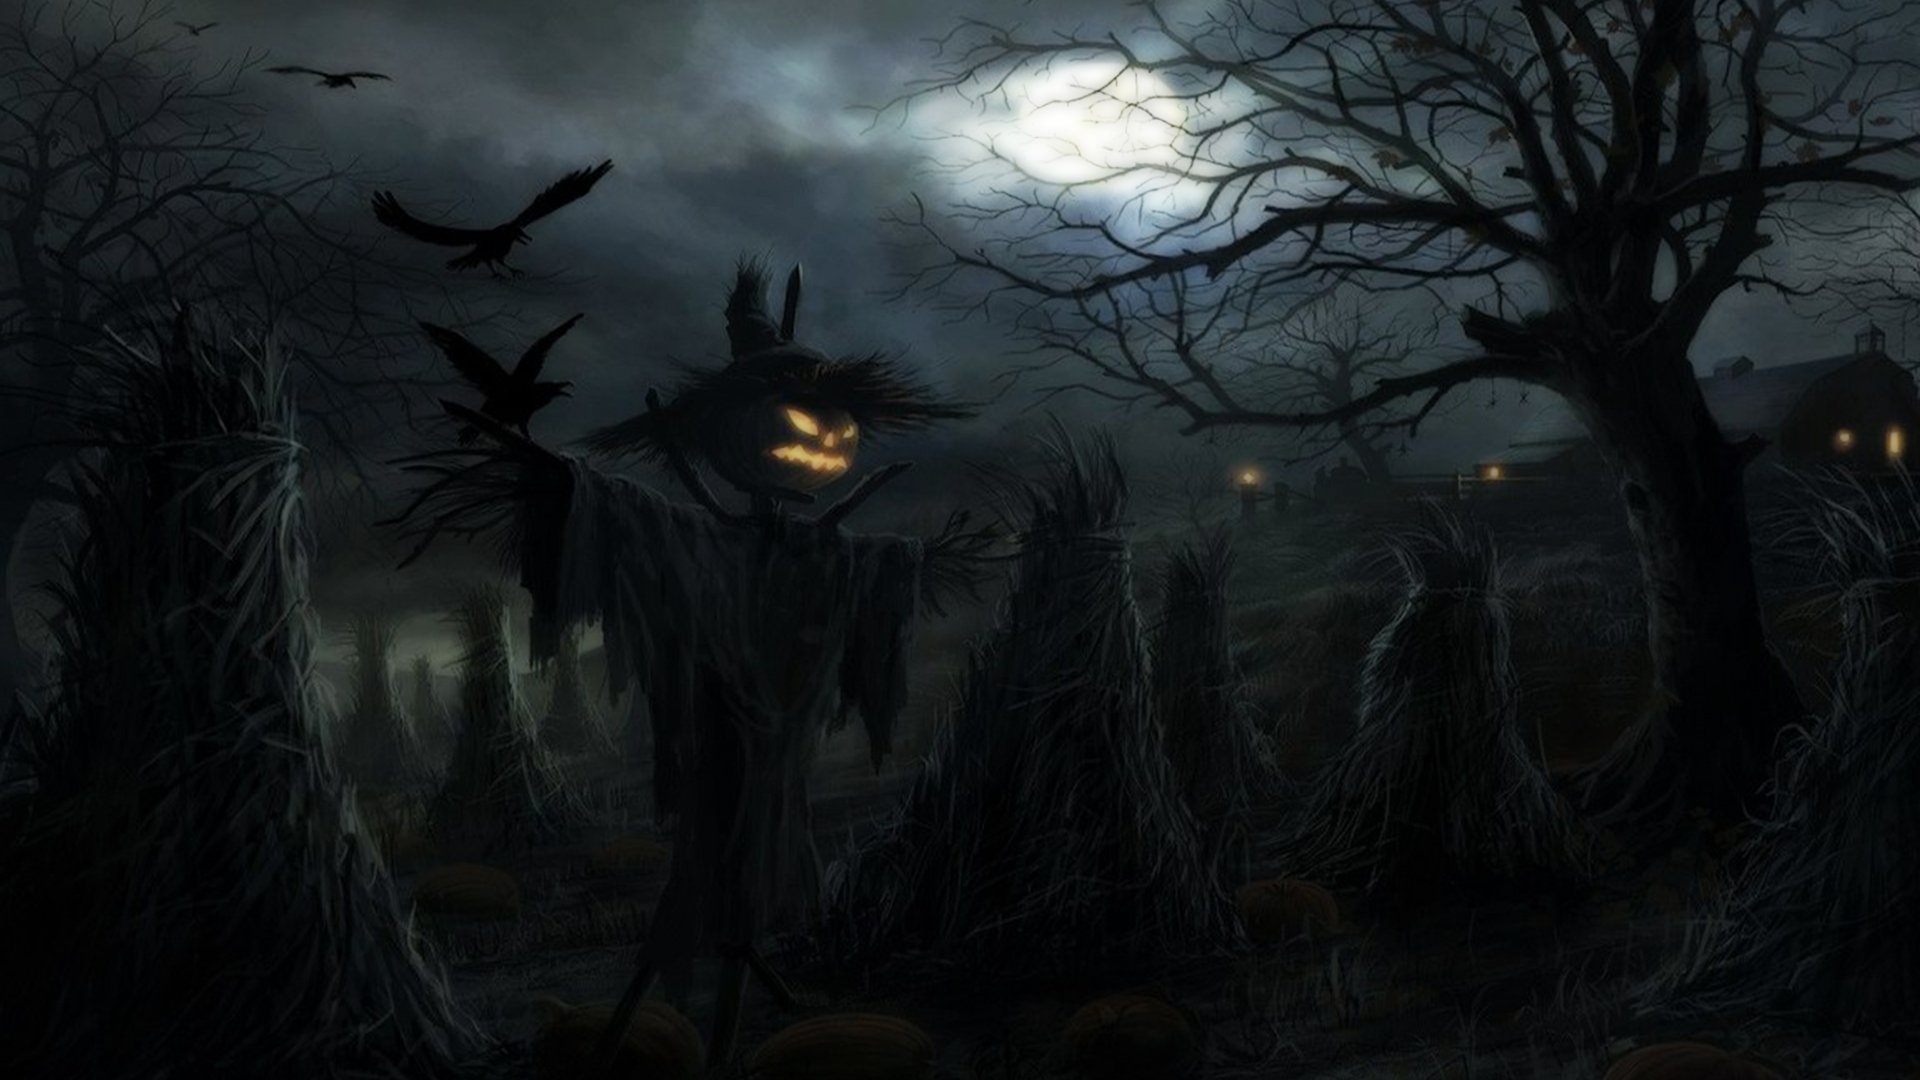  Download Scary Halloween Backgrounds 1920x1080